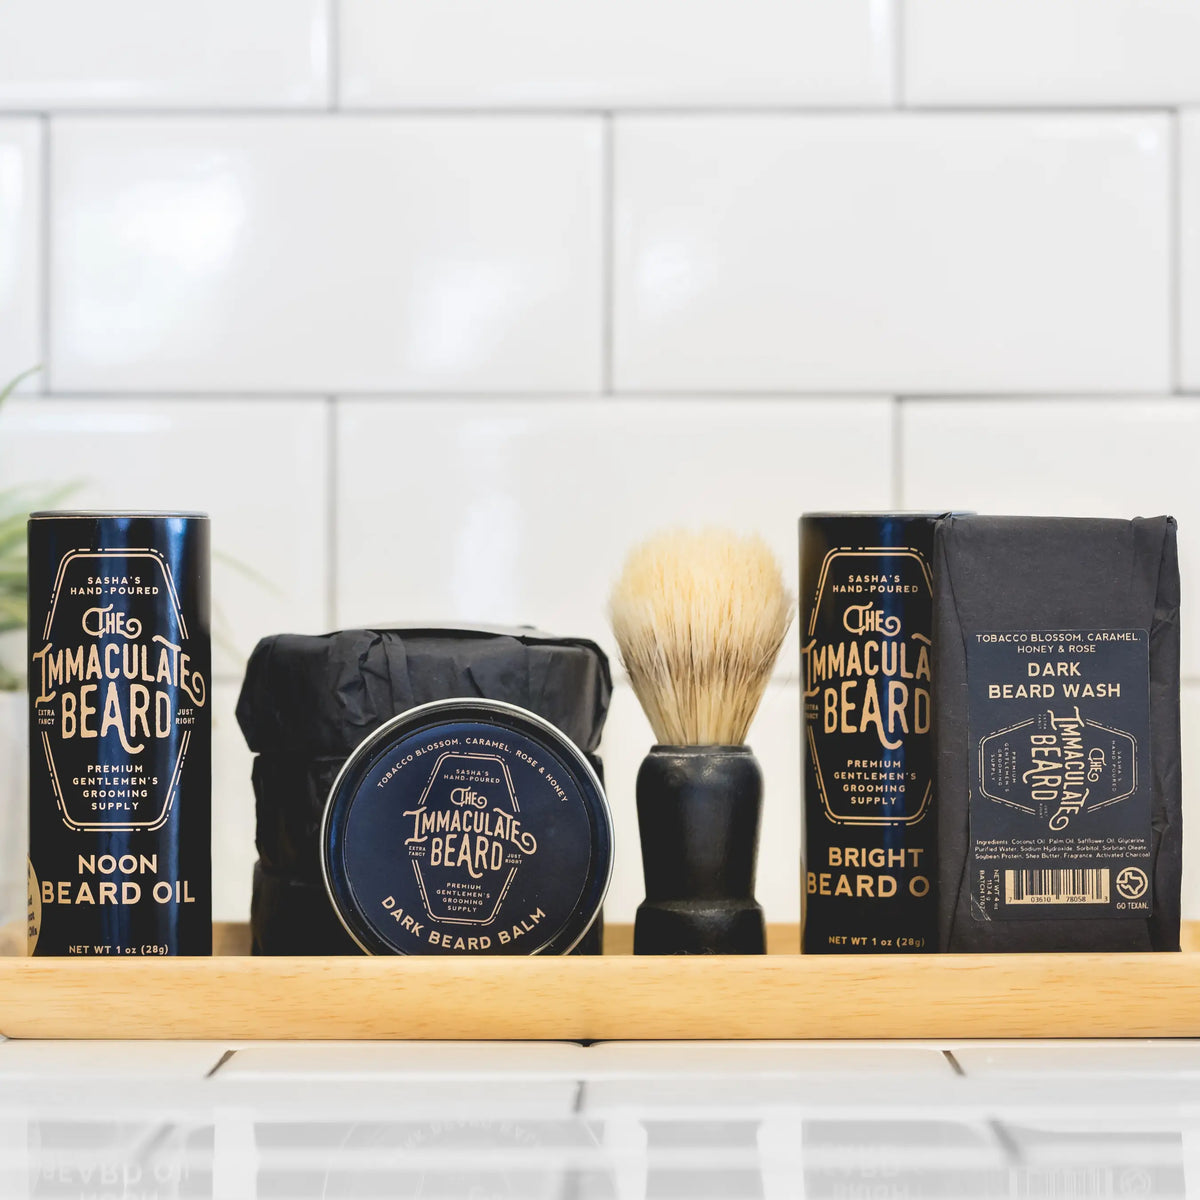 A range of The Immaculate Beard men's grooming products on a wooden shelf against a white tiled background, including beard oil, beard wash, shaving brush, The Immaculate Beard - Shave Soap Puck, and other packaged products.